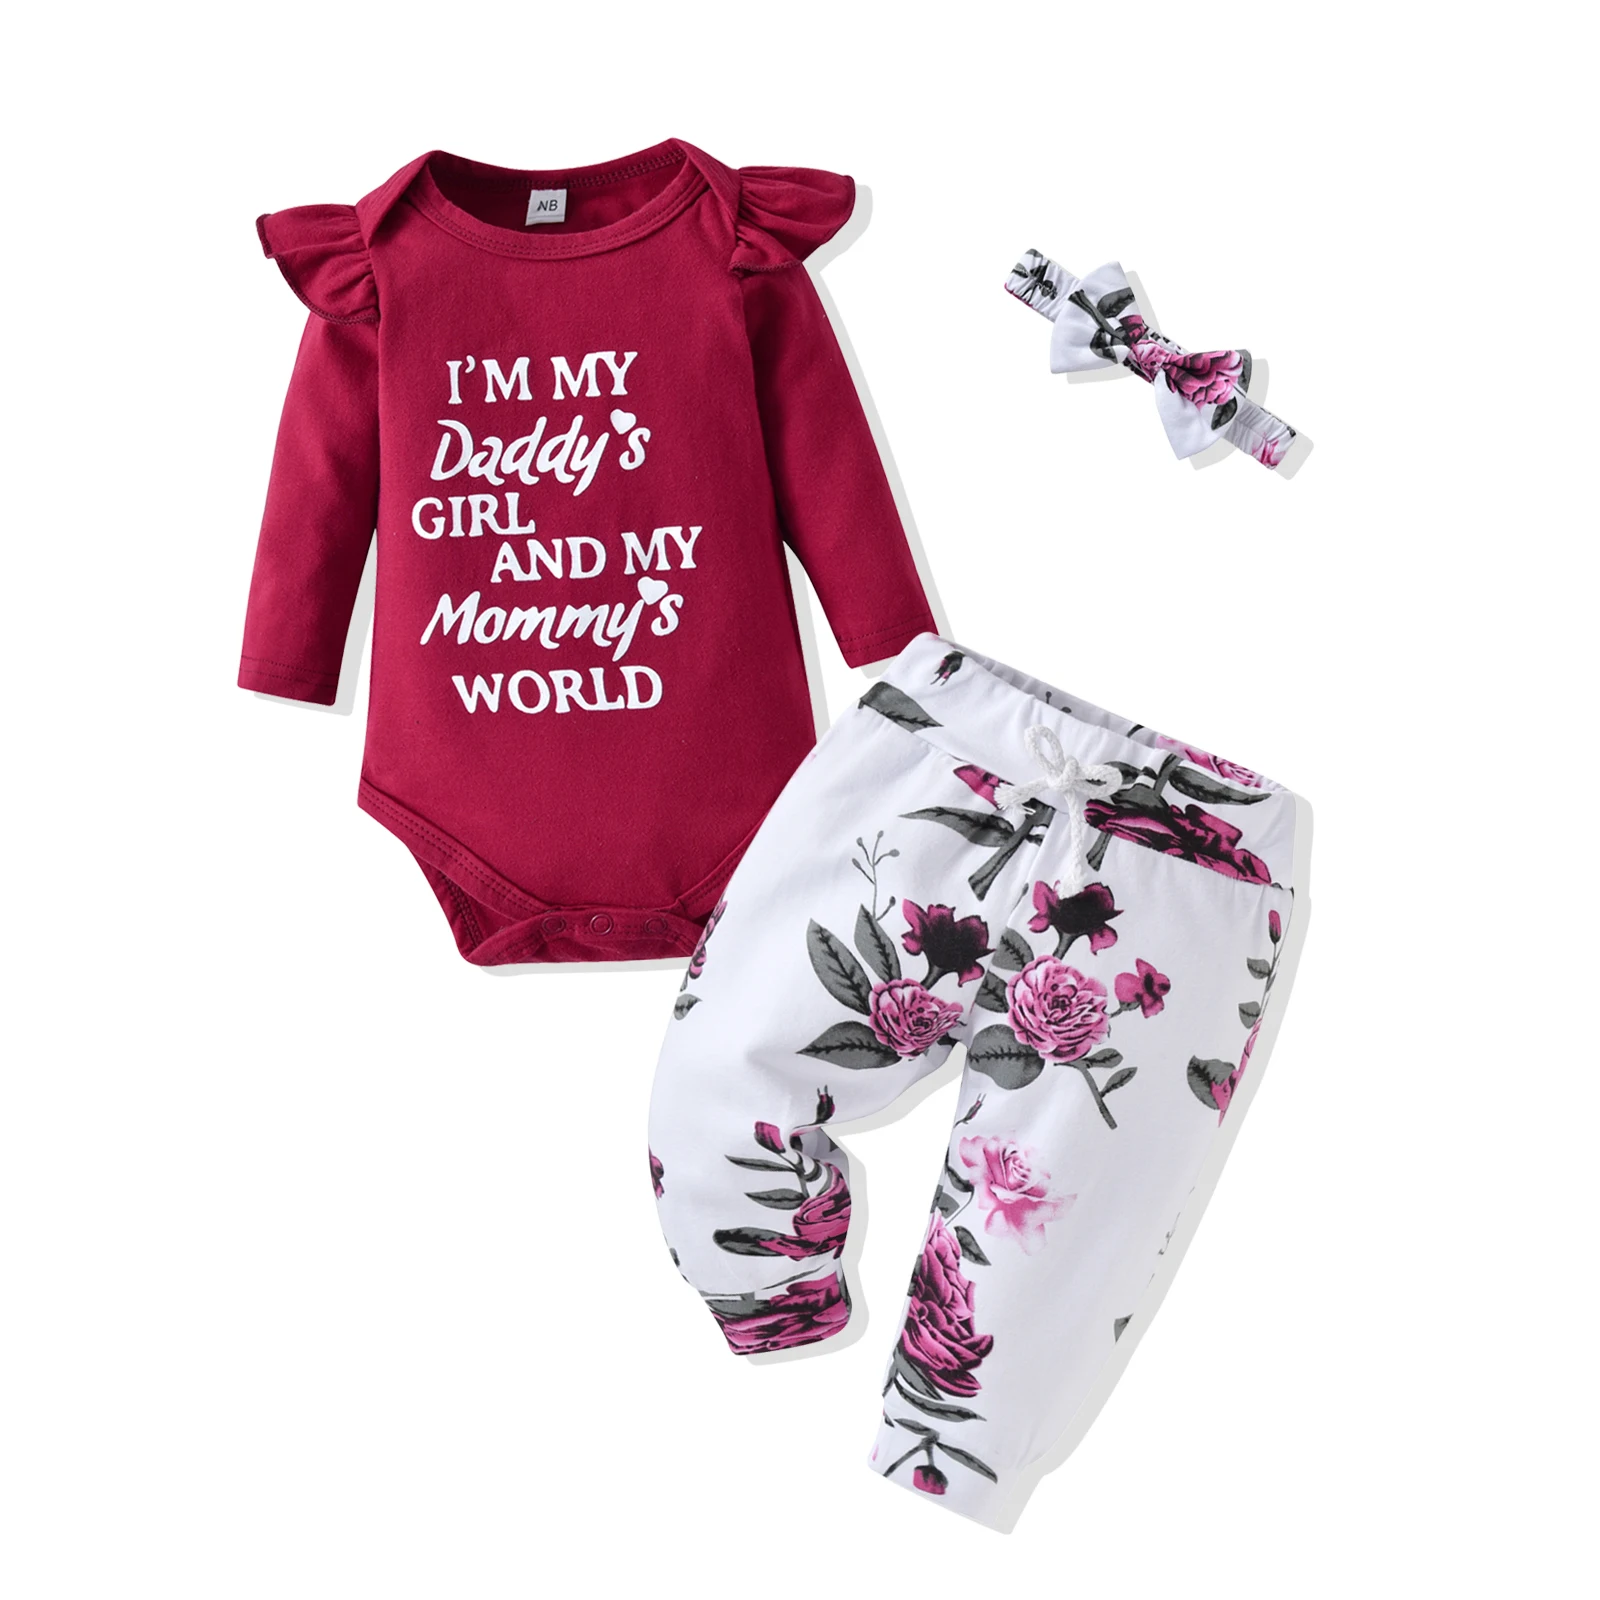 Newborn Clothes Baby Girls Coming Home Outfits Set Cute Cotton Letter Long Sleeve Bodysuit and Pants Bow Bandana Infant Clothing baby shirt clothing set Baby Clothing Set